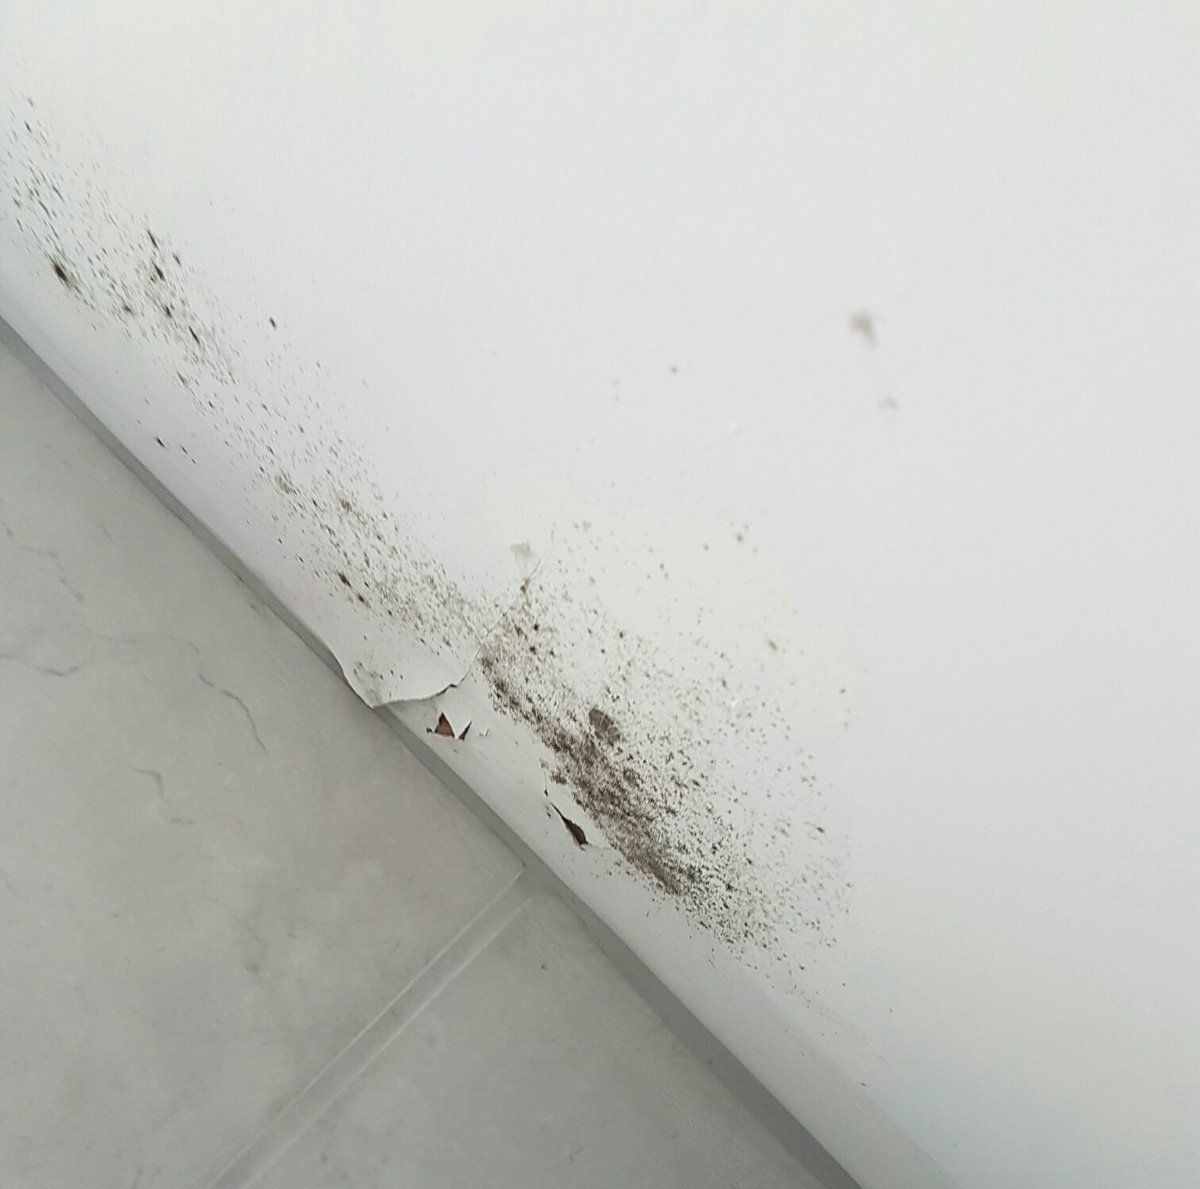 Mummy Fever On Twitter How To Remove Household Mould Https T